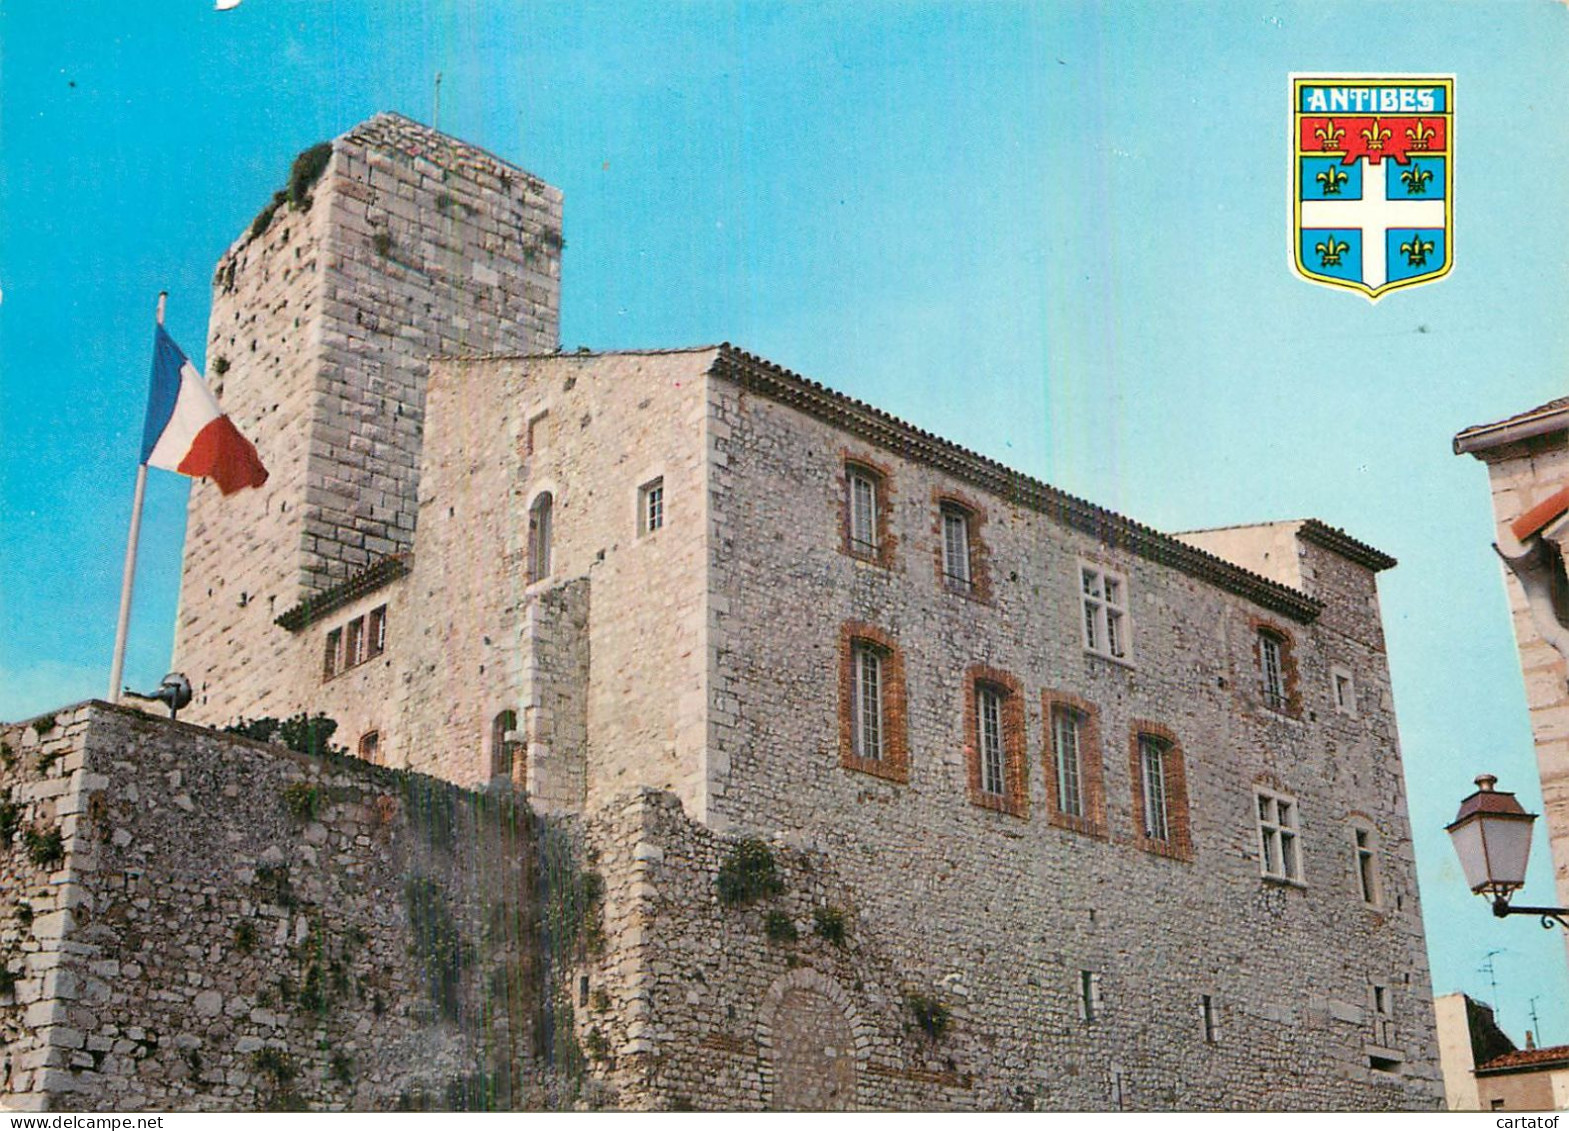 ANTIBES . Château Musée Picasso - Antibes - Old Town